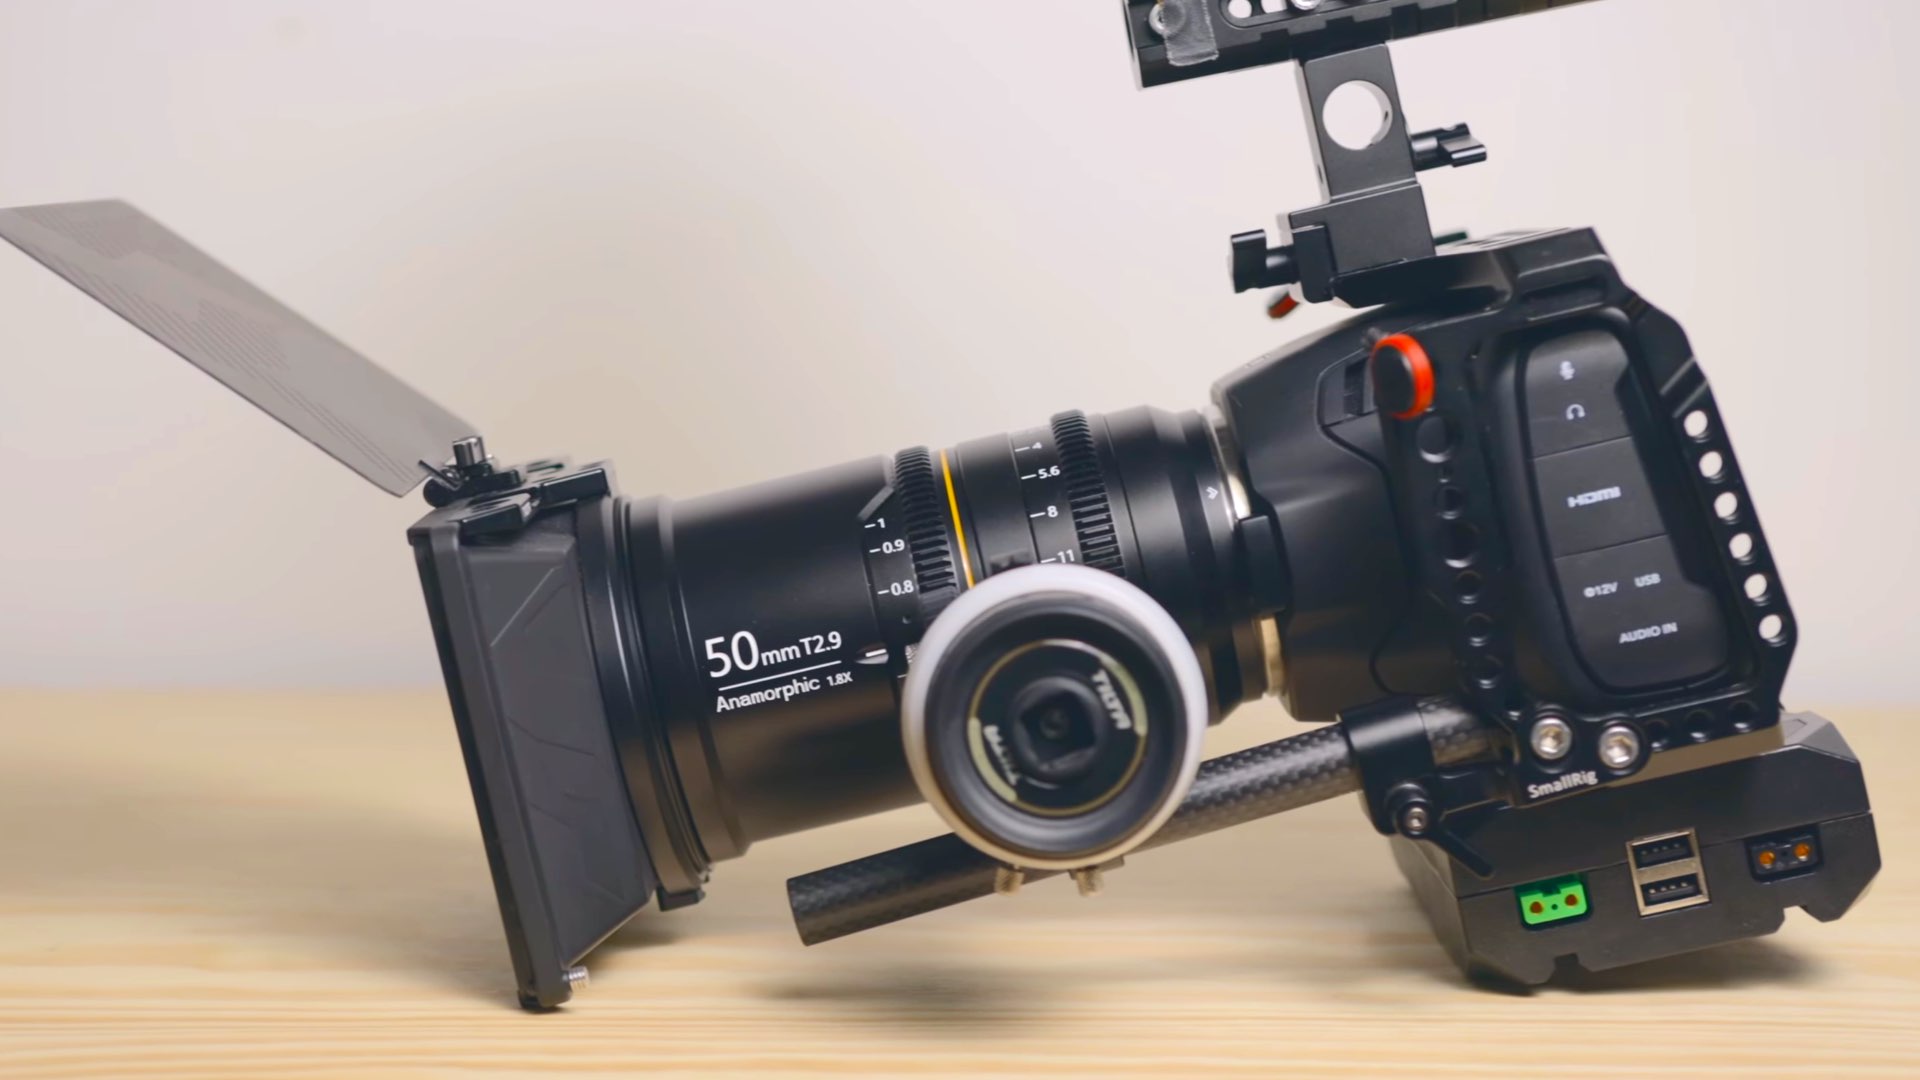 The GREAT JOY 50mm T2.9 1.8x full-frame anamorphic lens on the Blackmagic Pocket Cinema Camera. Picture: Of Two Lands